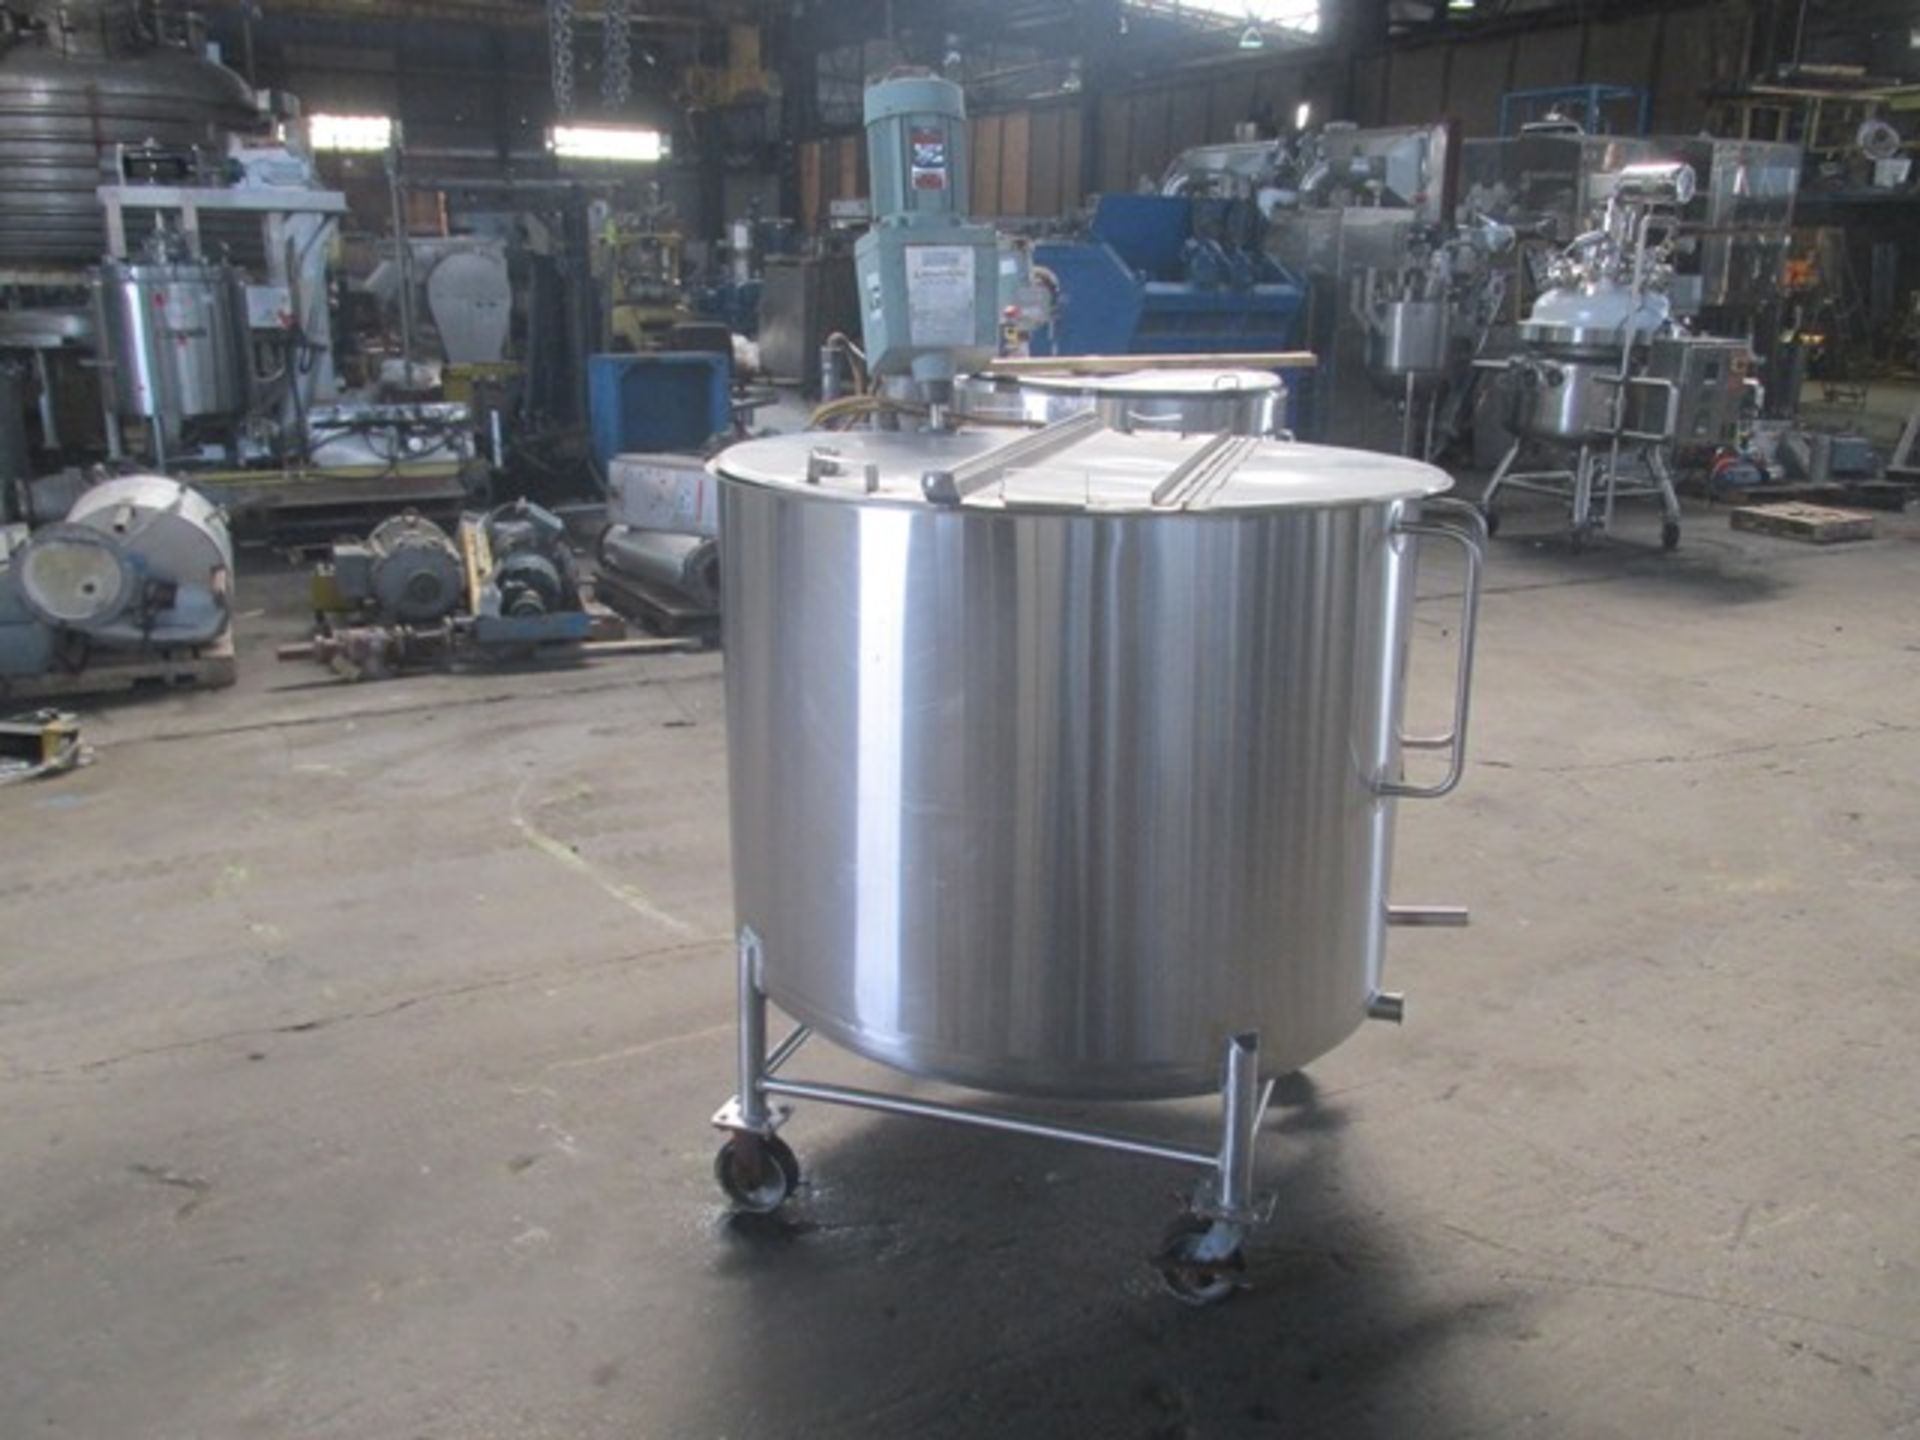 250 gallon CherryBurrell mix tank, stainless steel construction, 48" diameter x 36" straight sides - Image 2 of 9